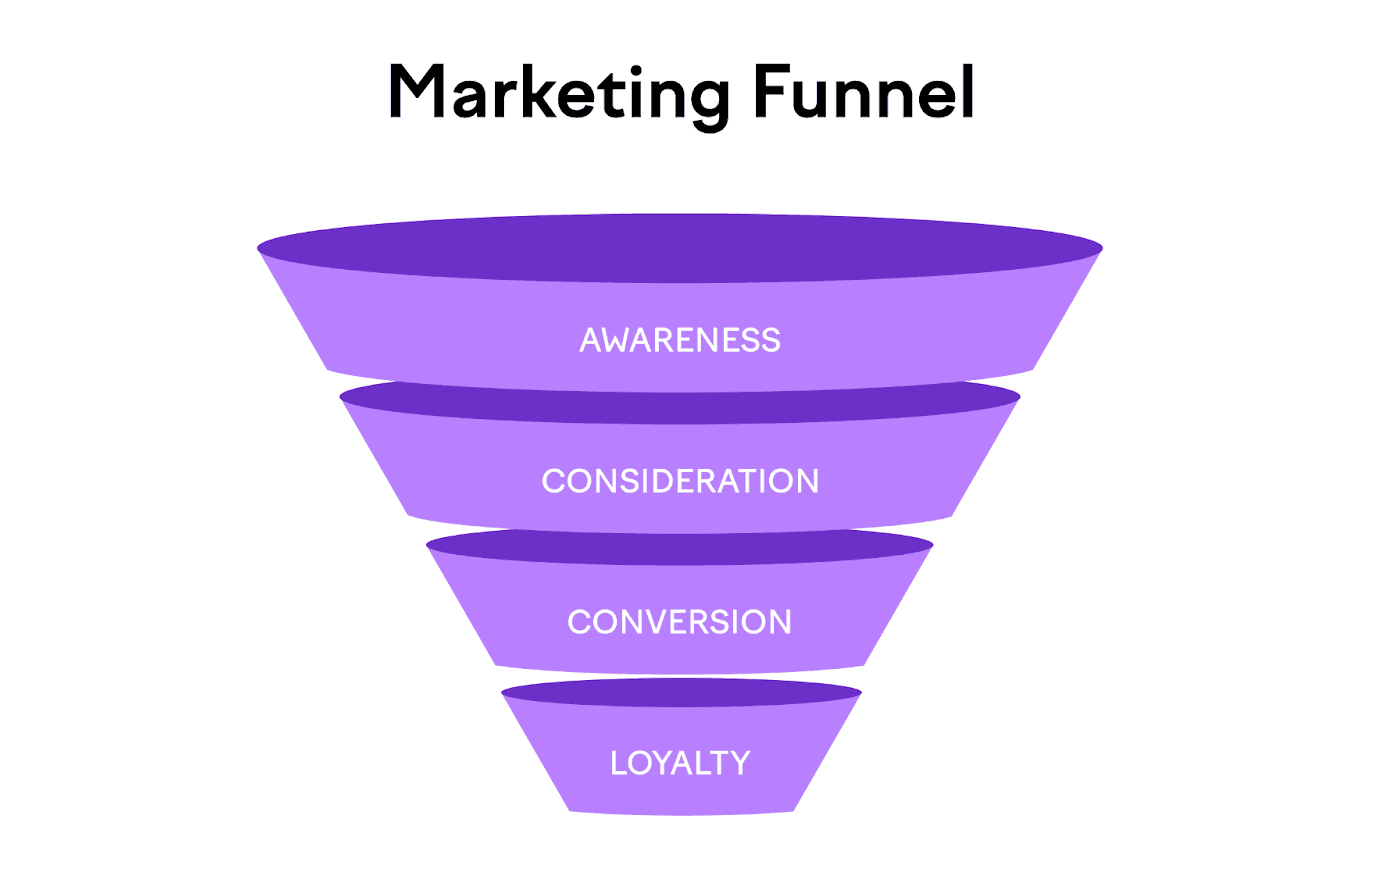 The Marketing Funnel